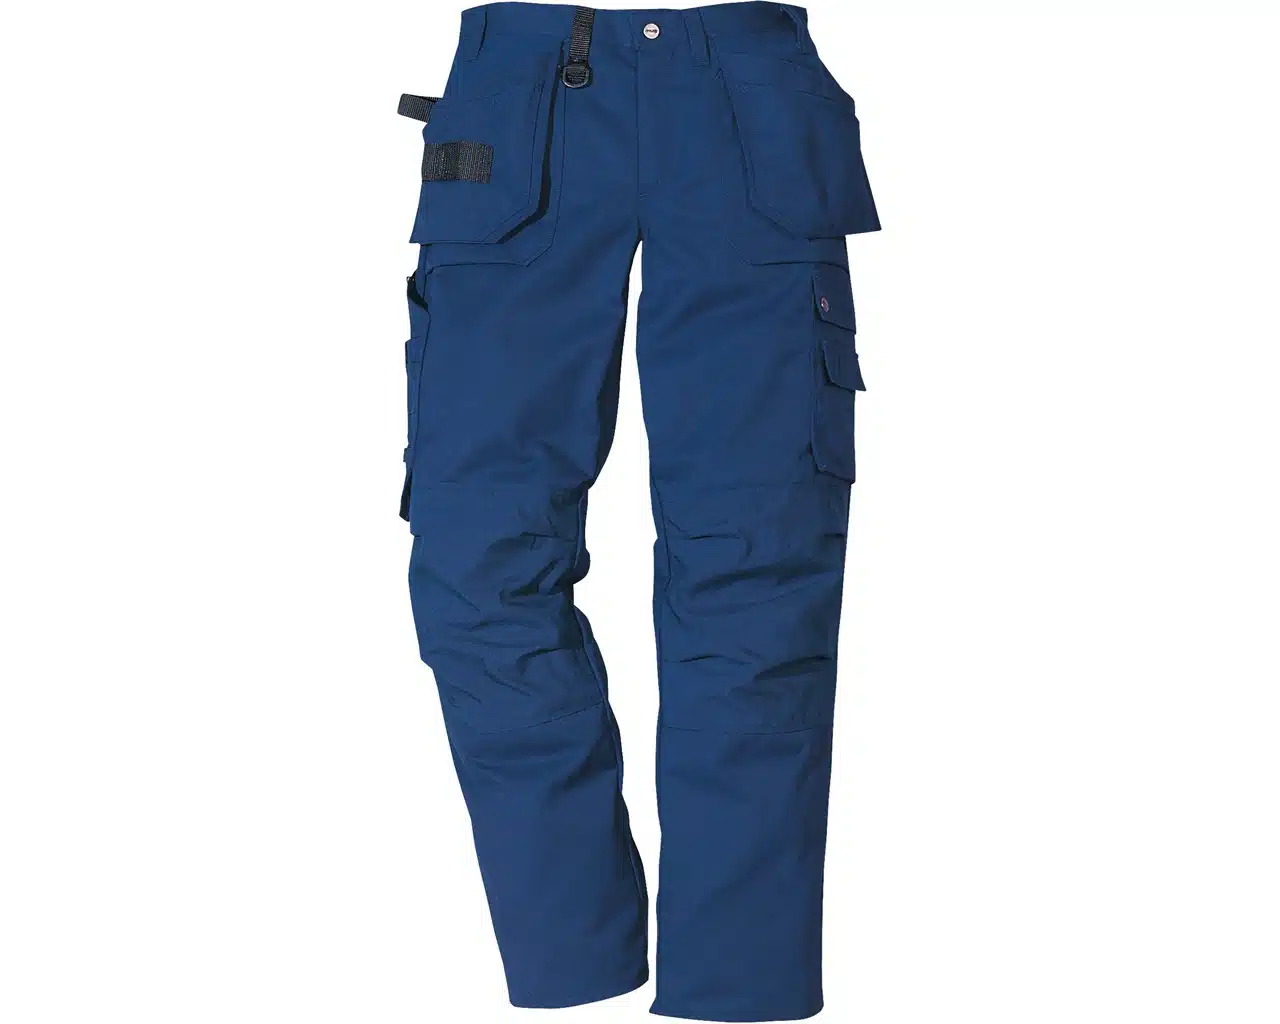 Fristads 100544 Craftsman Trousers 241 PS25-NAVY-C148